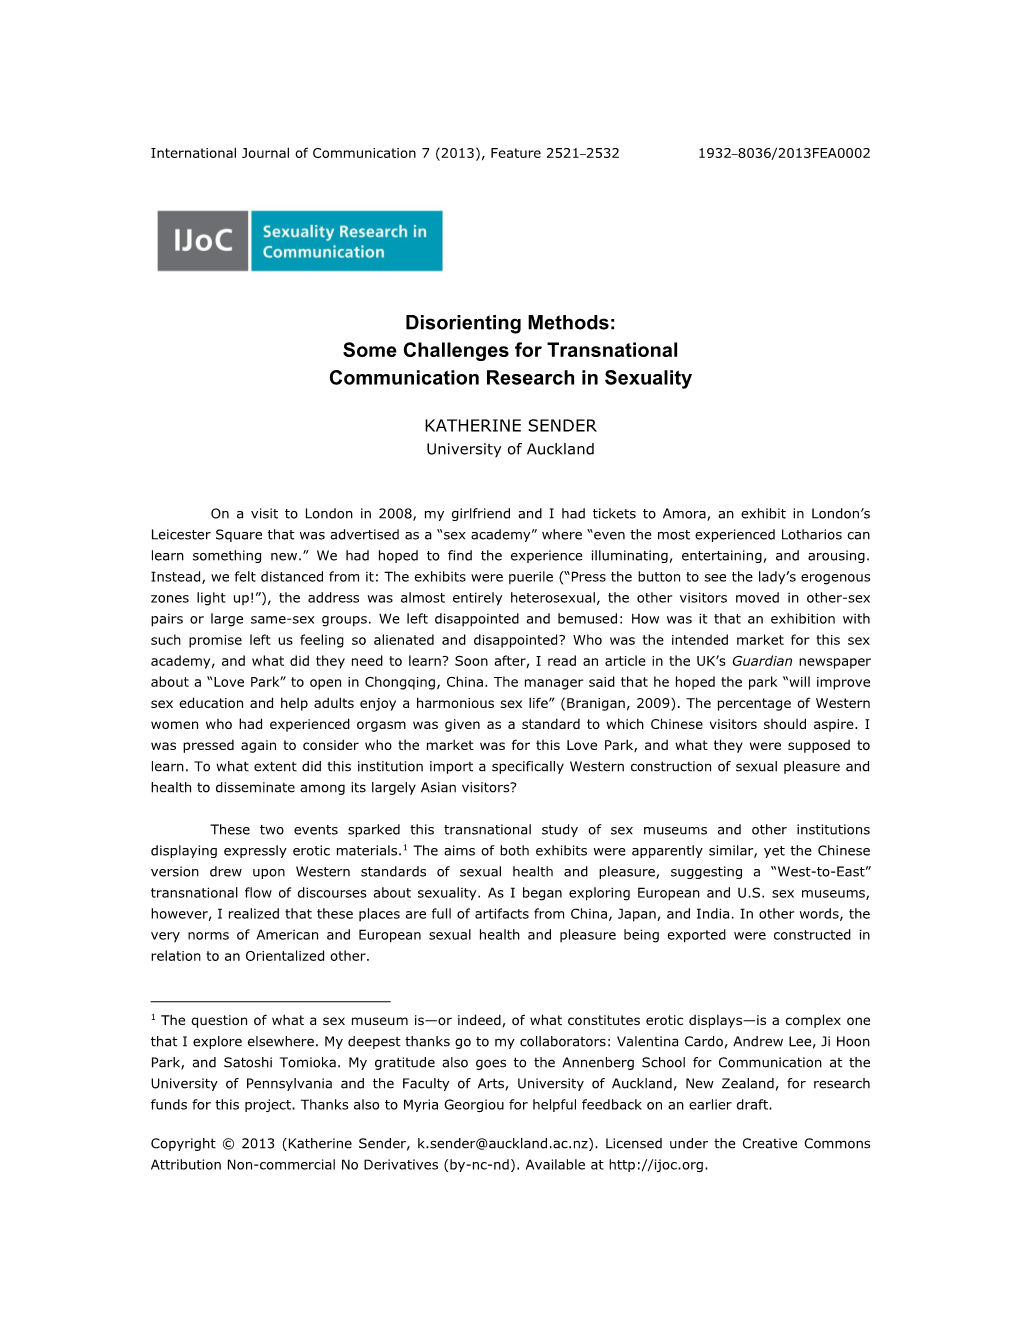 Disorienting Methods: Some Challenges for Transnational Communication Research in Sexuality